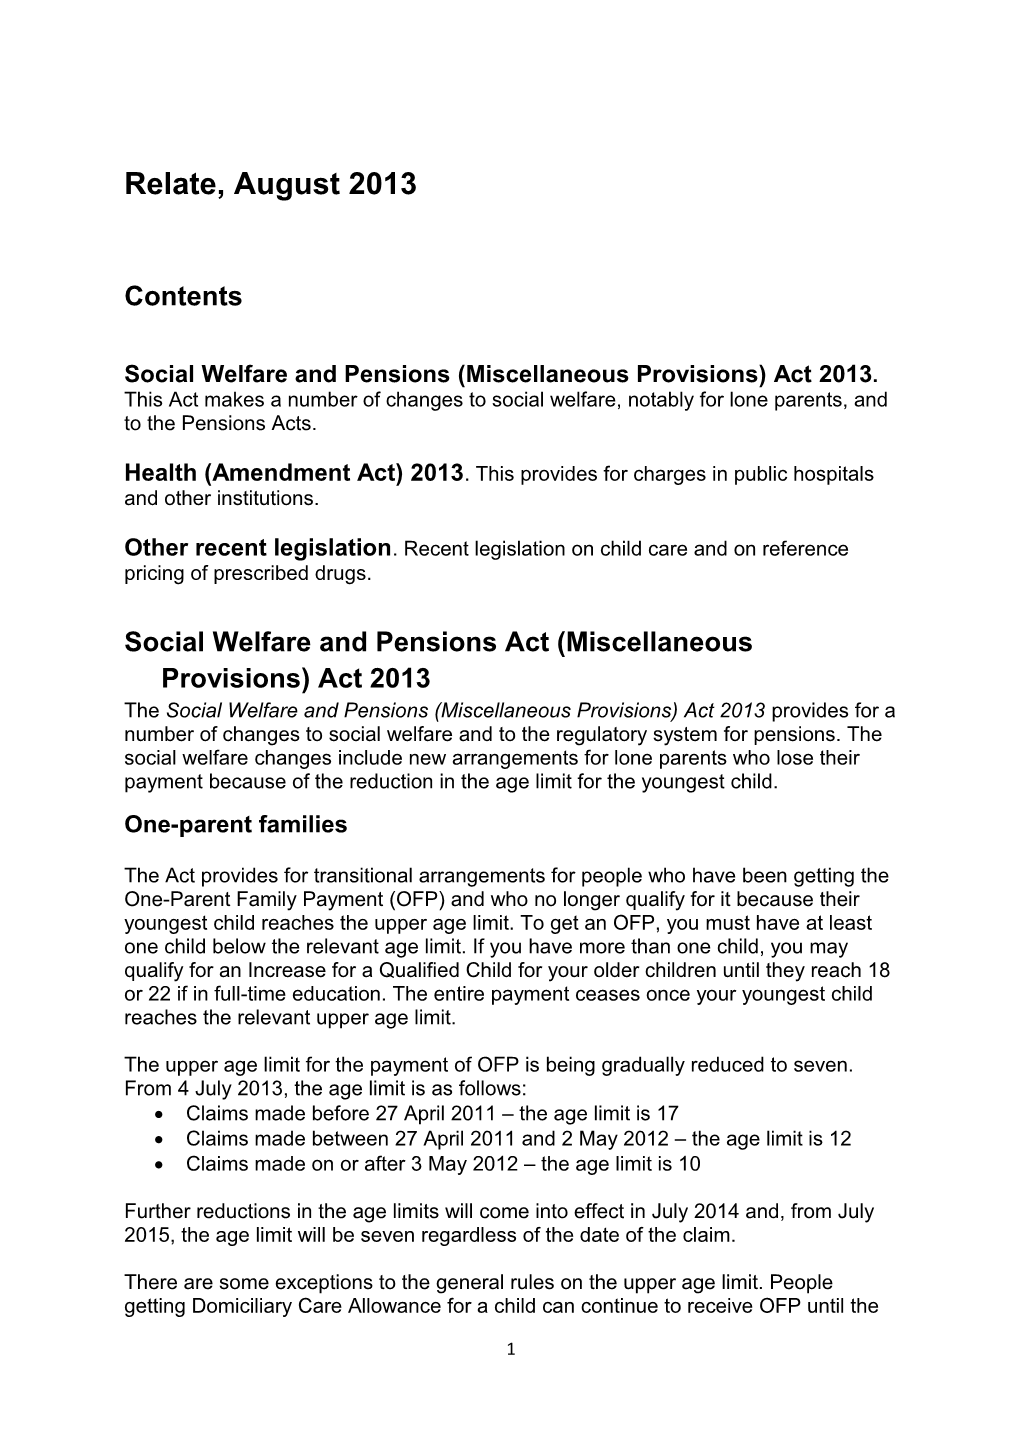 Social Welfare and Pensions Act (Miscellaneous Provisions) Act 2013